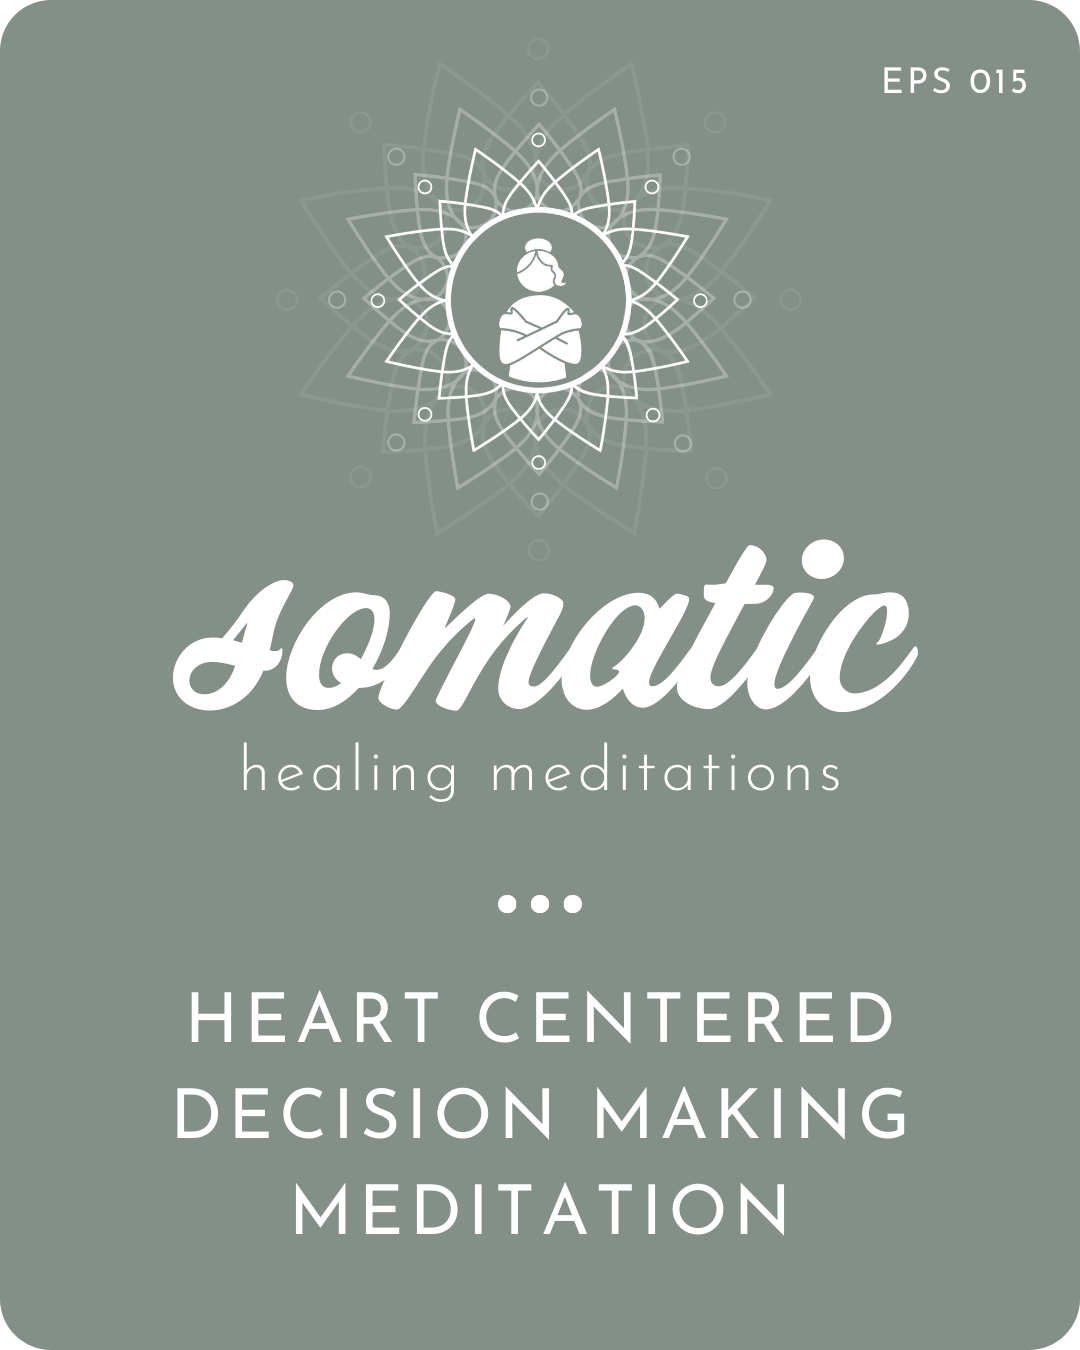 Heart Centered Decision Making Guided Meditation